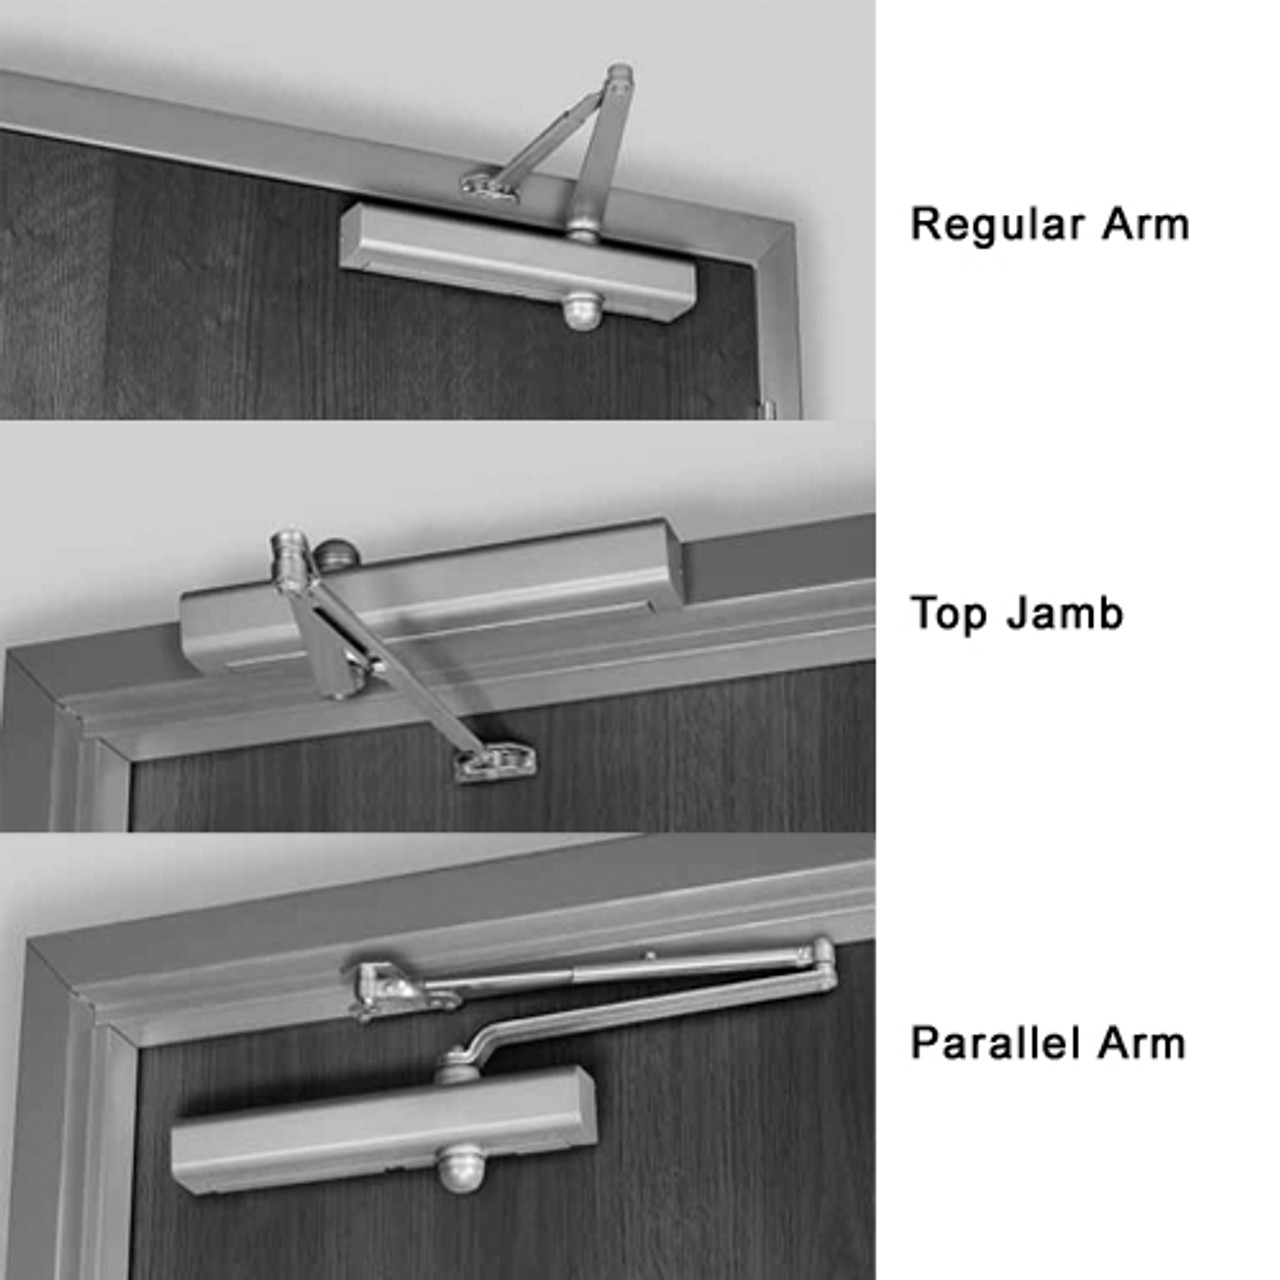 8101H-691 Norton 8000 Series Hold Open Door Closers with Regular Parallel and Top Jamb to 3 inch Reveal in Dull Bronze Finish